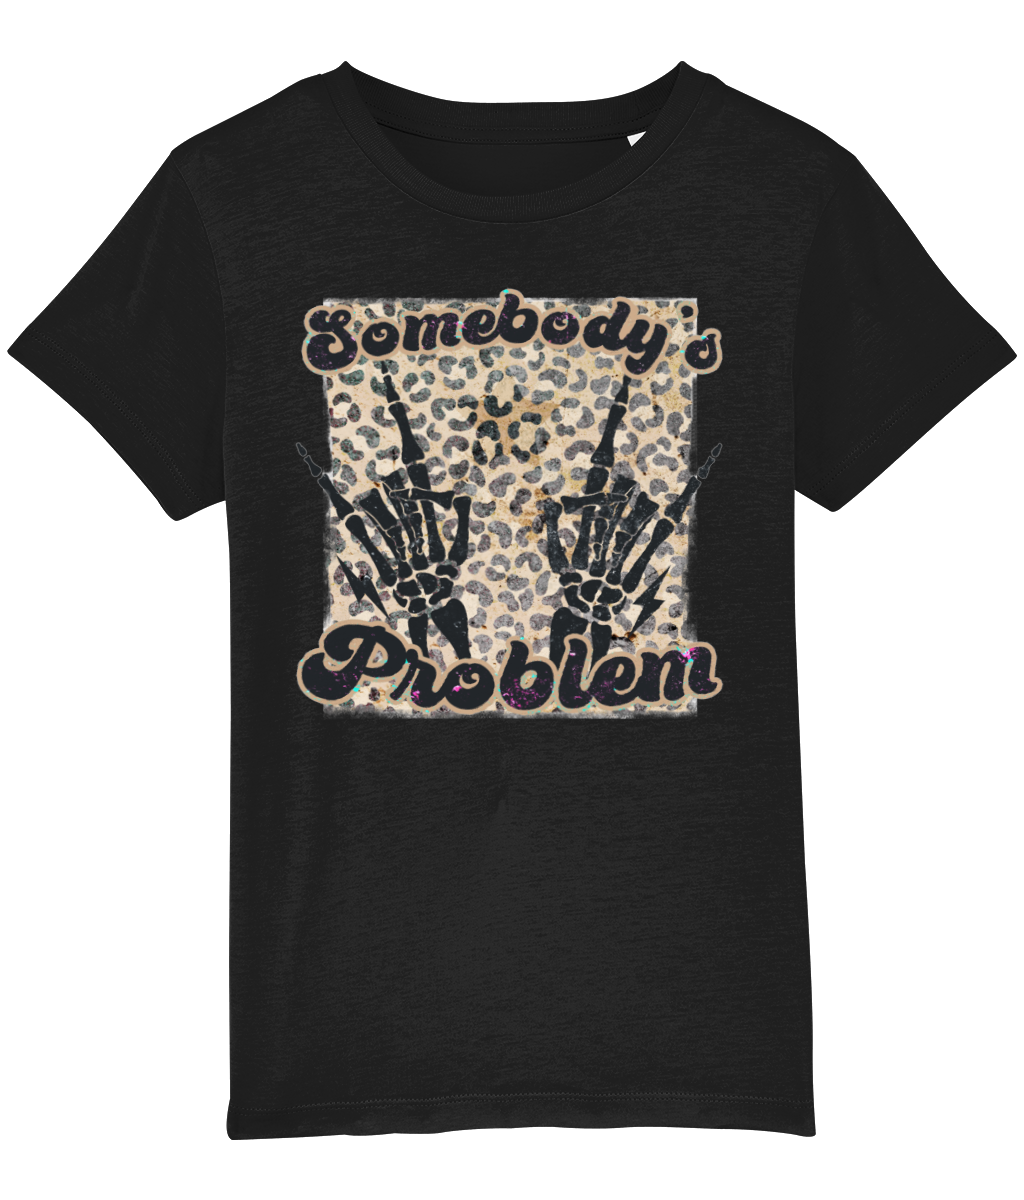 Somebody's Problem Junior Tee - Super Soft Cotton! For the kid with the rebellious spirit!